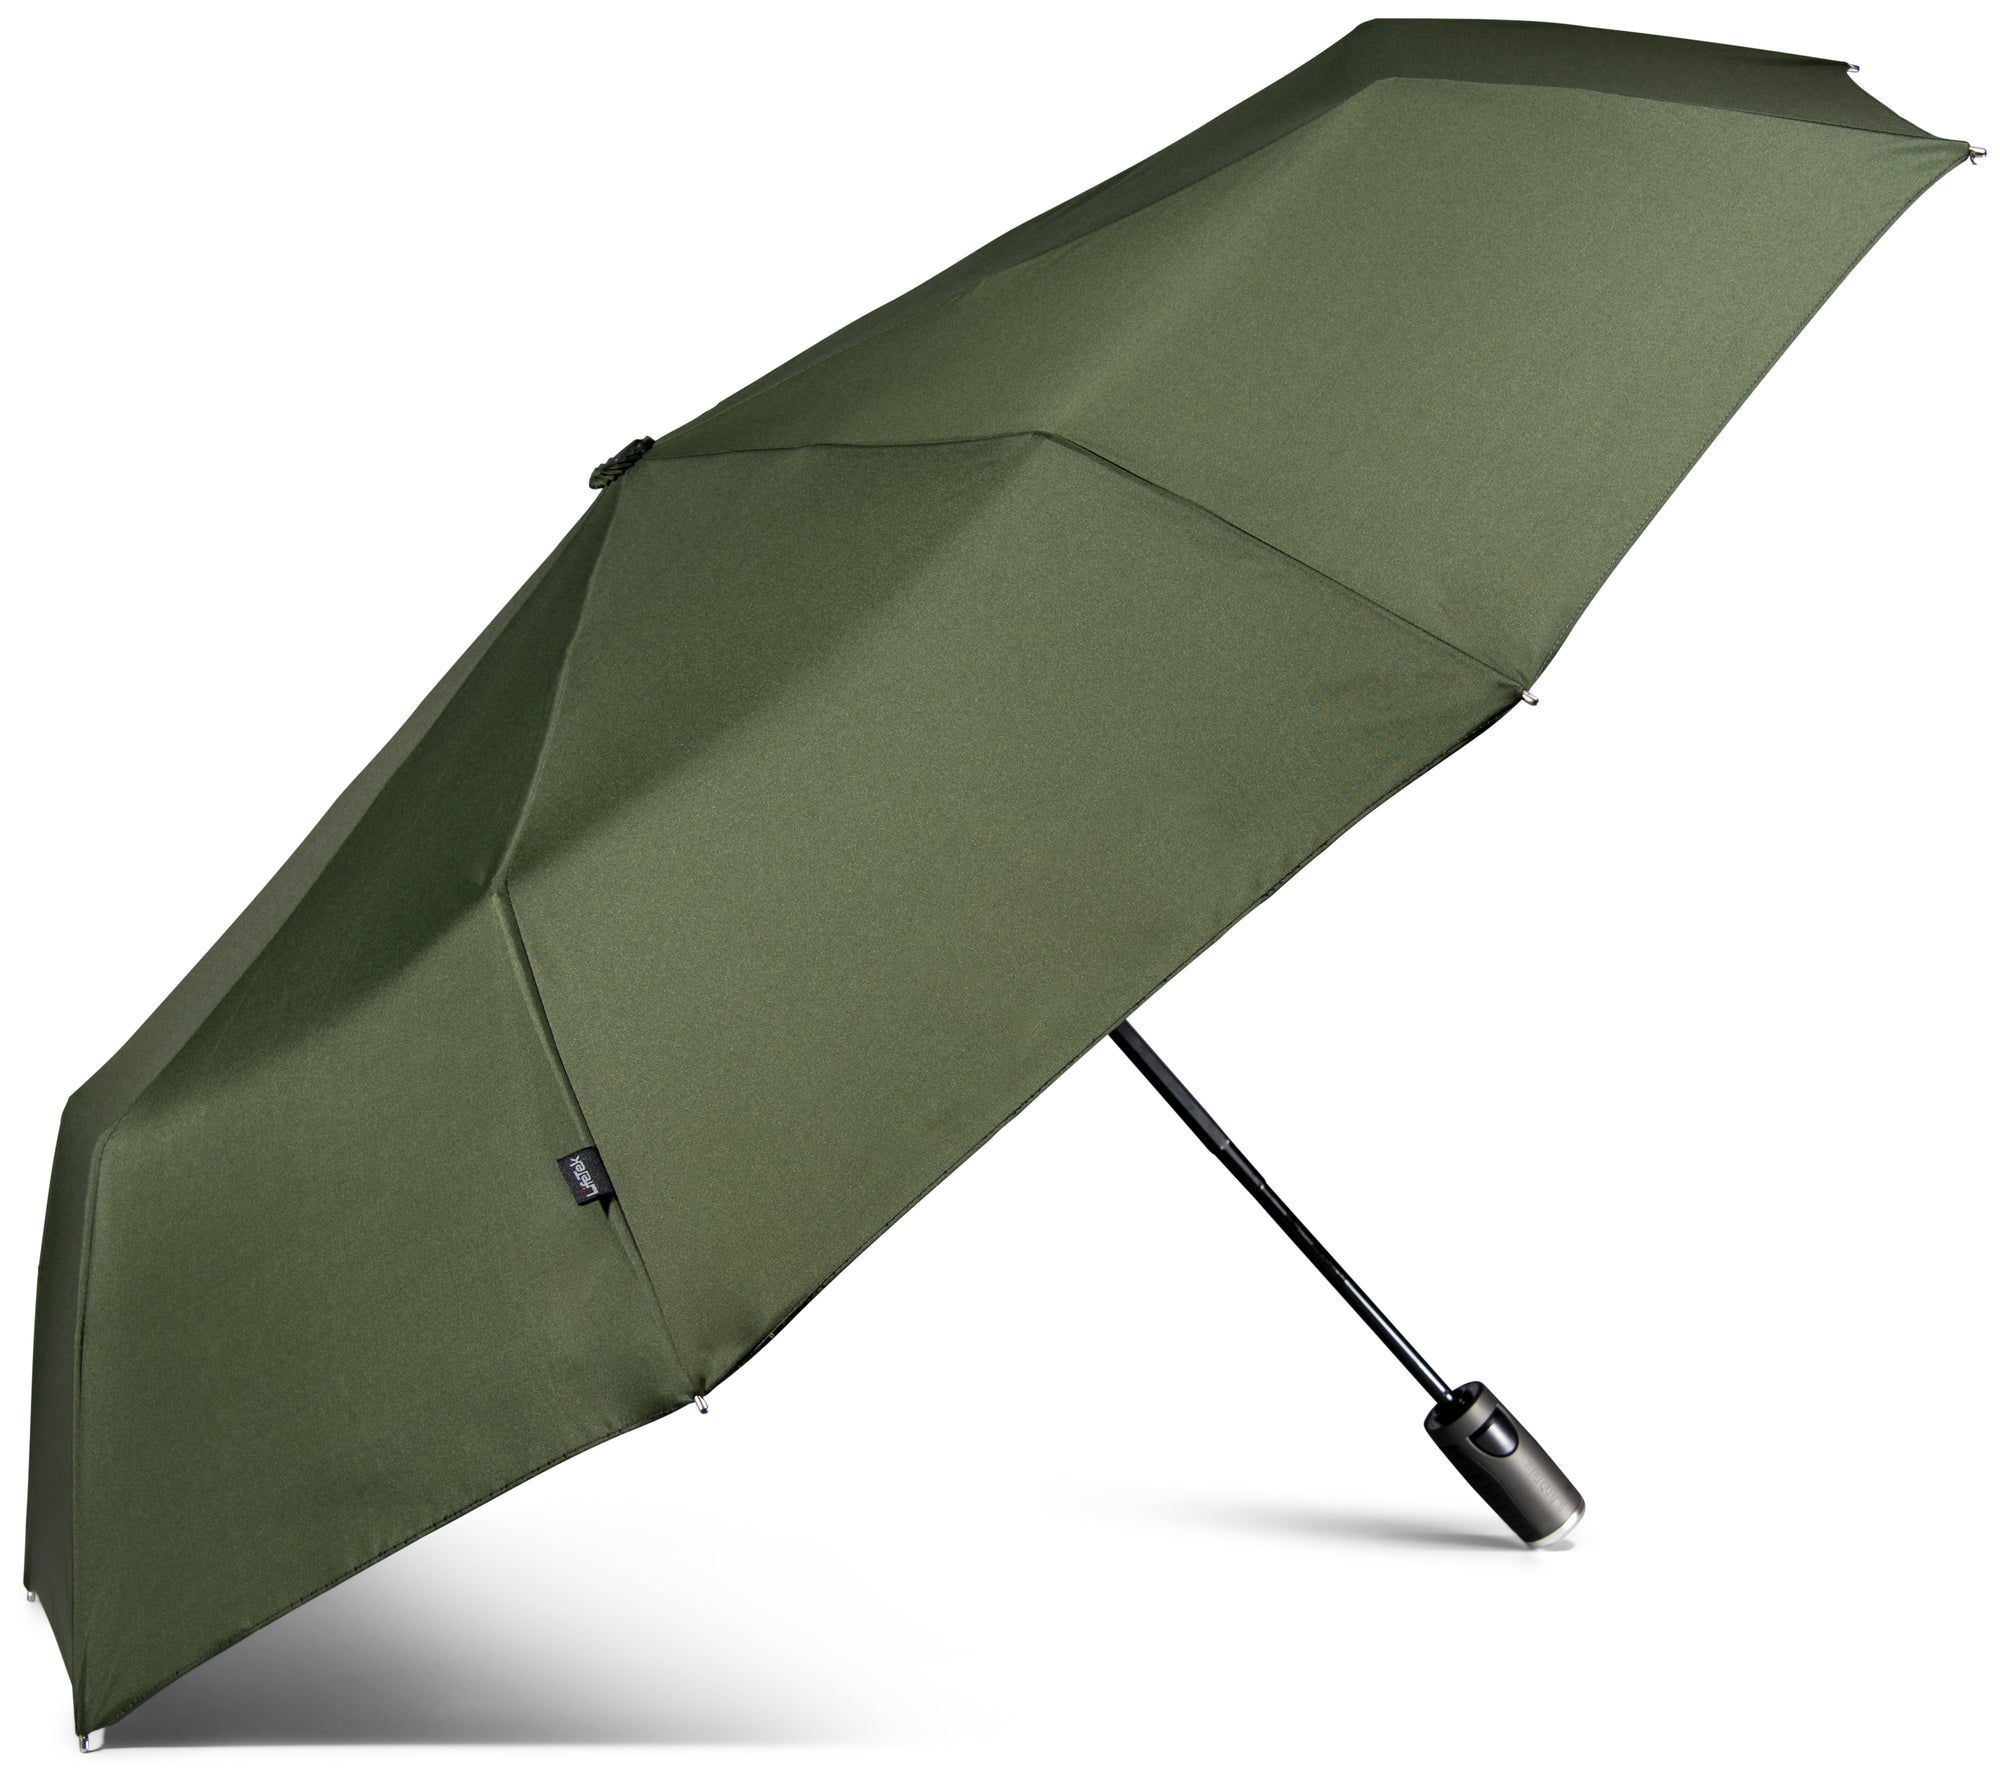 LifeTek Windproof Travel Umbrella - Compact, Automatic, Wind Resistant, Strong and Portable - Small Folding Backpack Umbrella for Rain perfect for Men and Women - FX1 42 inch Green lifetek.com